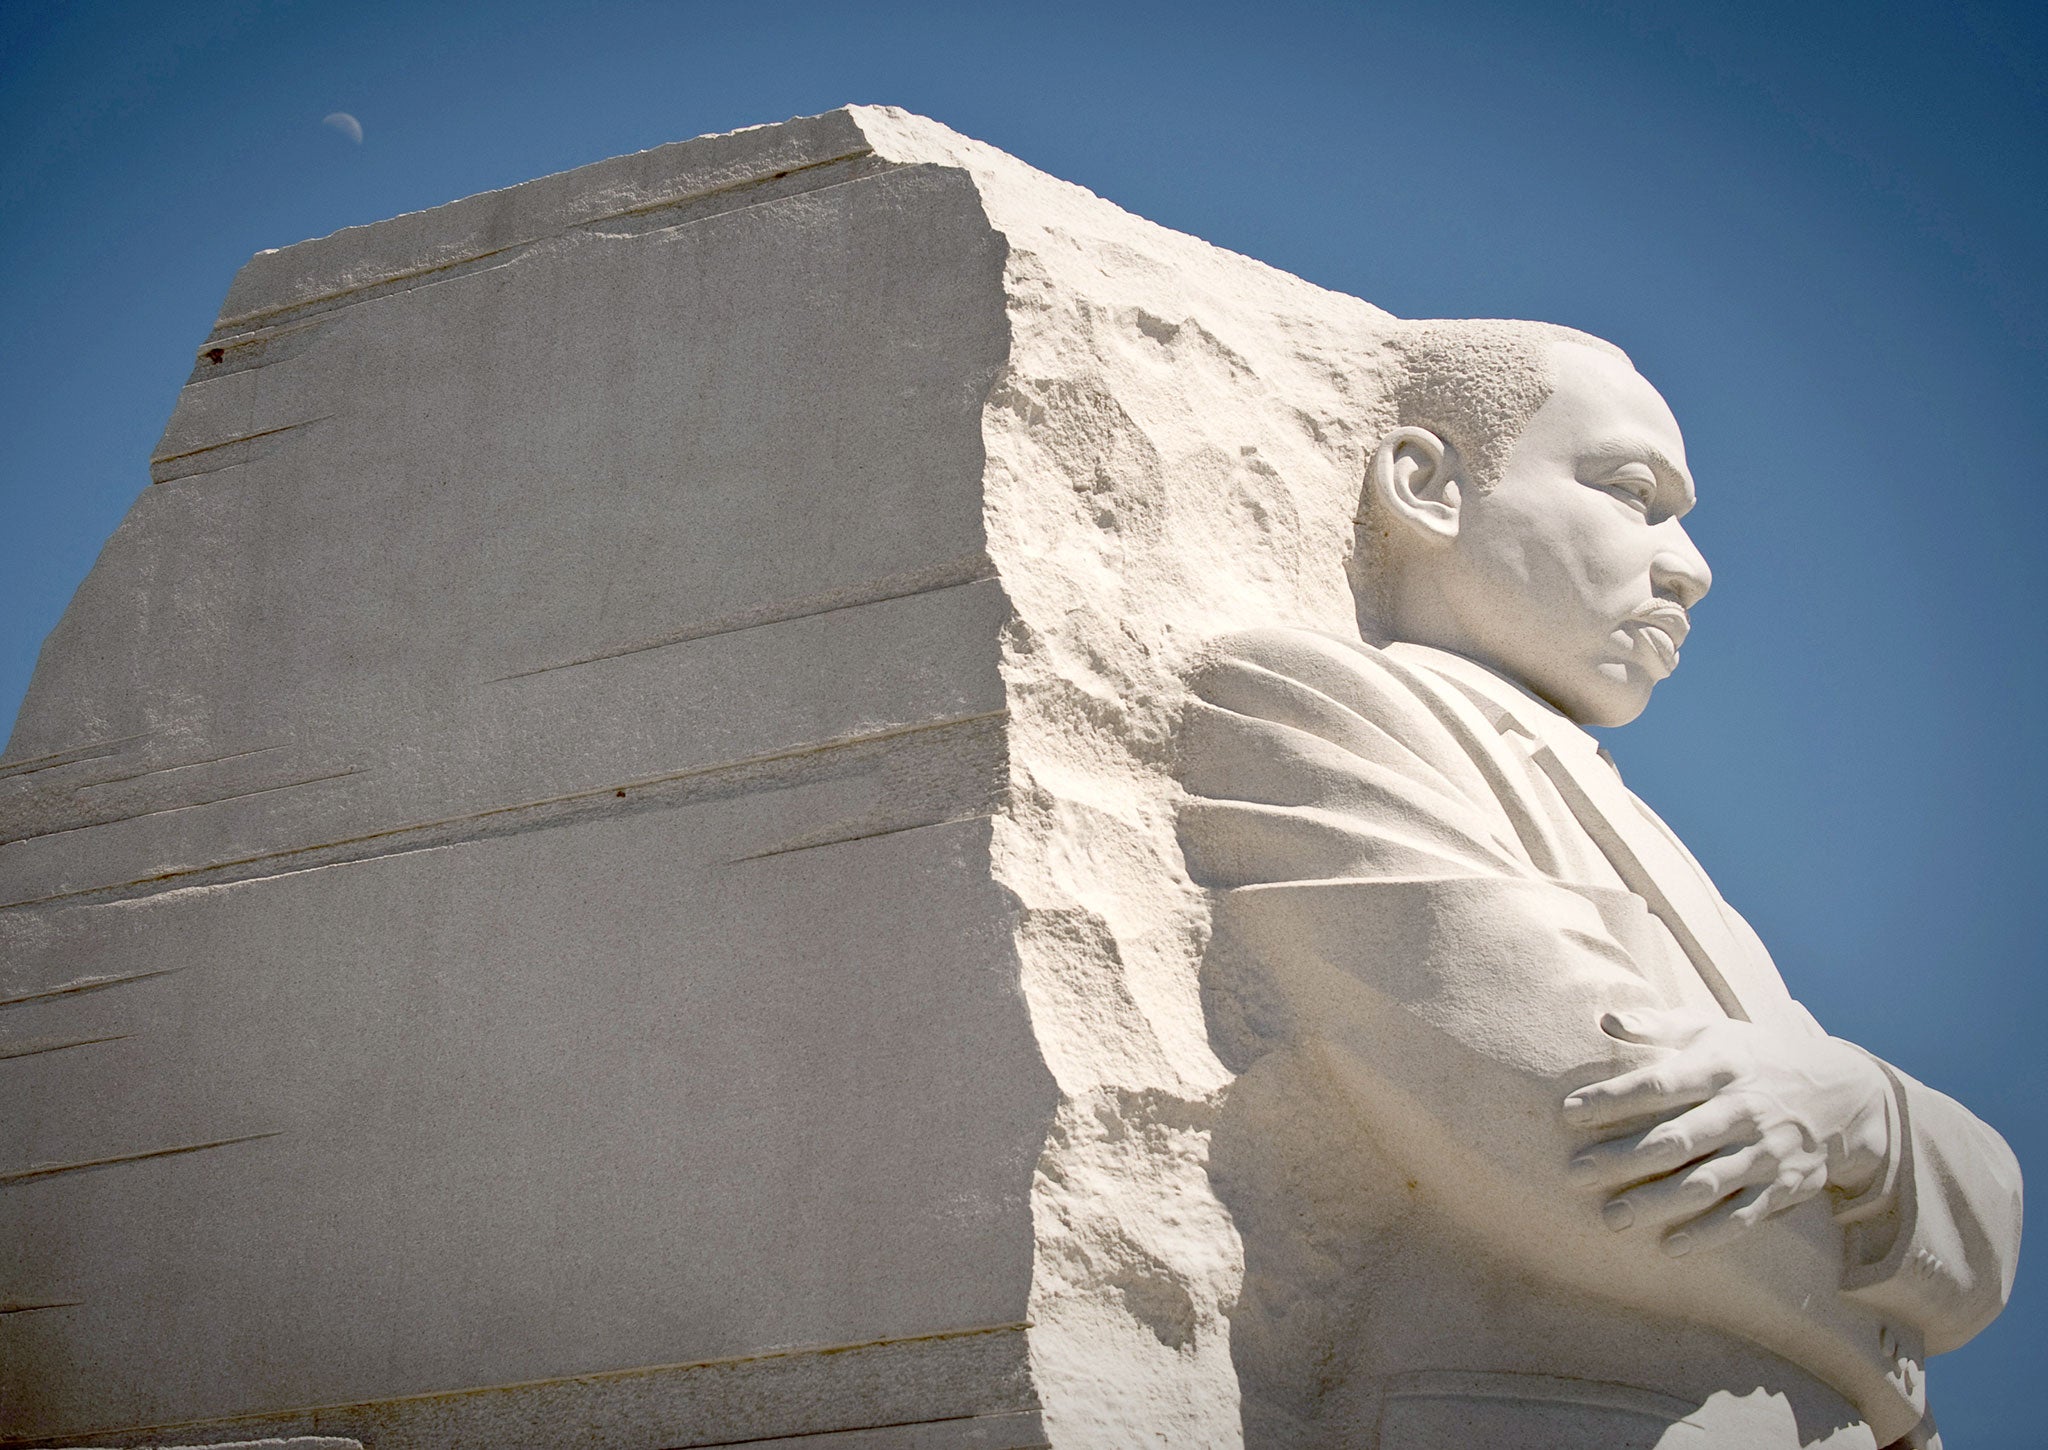 The Martin Luther King Jr. National Memorial in Washington D.C